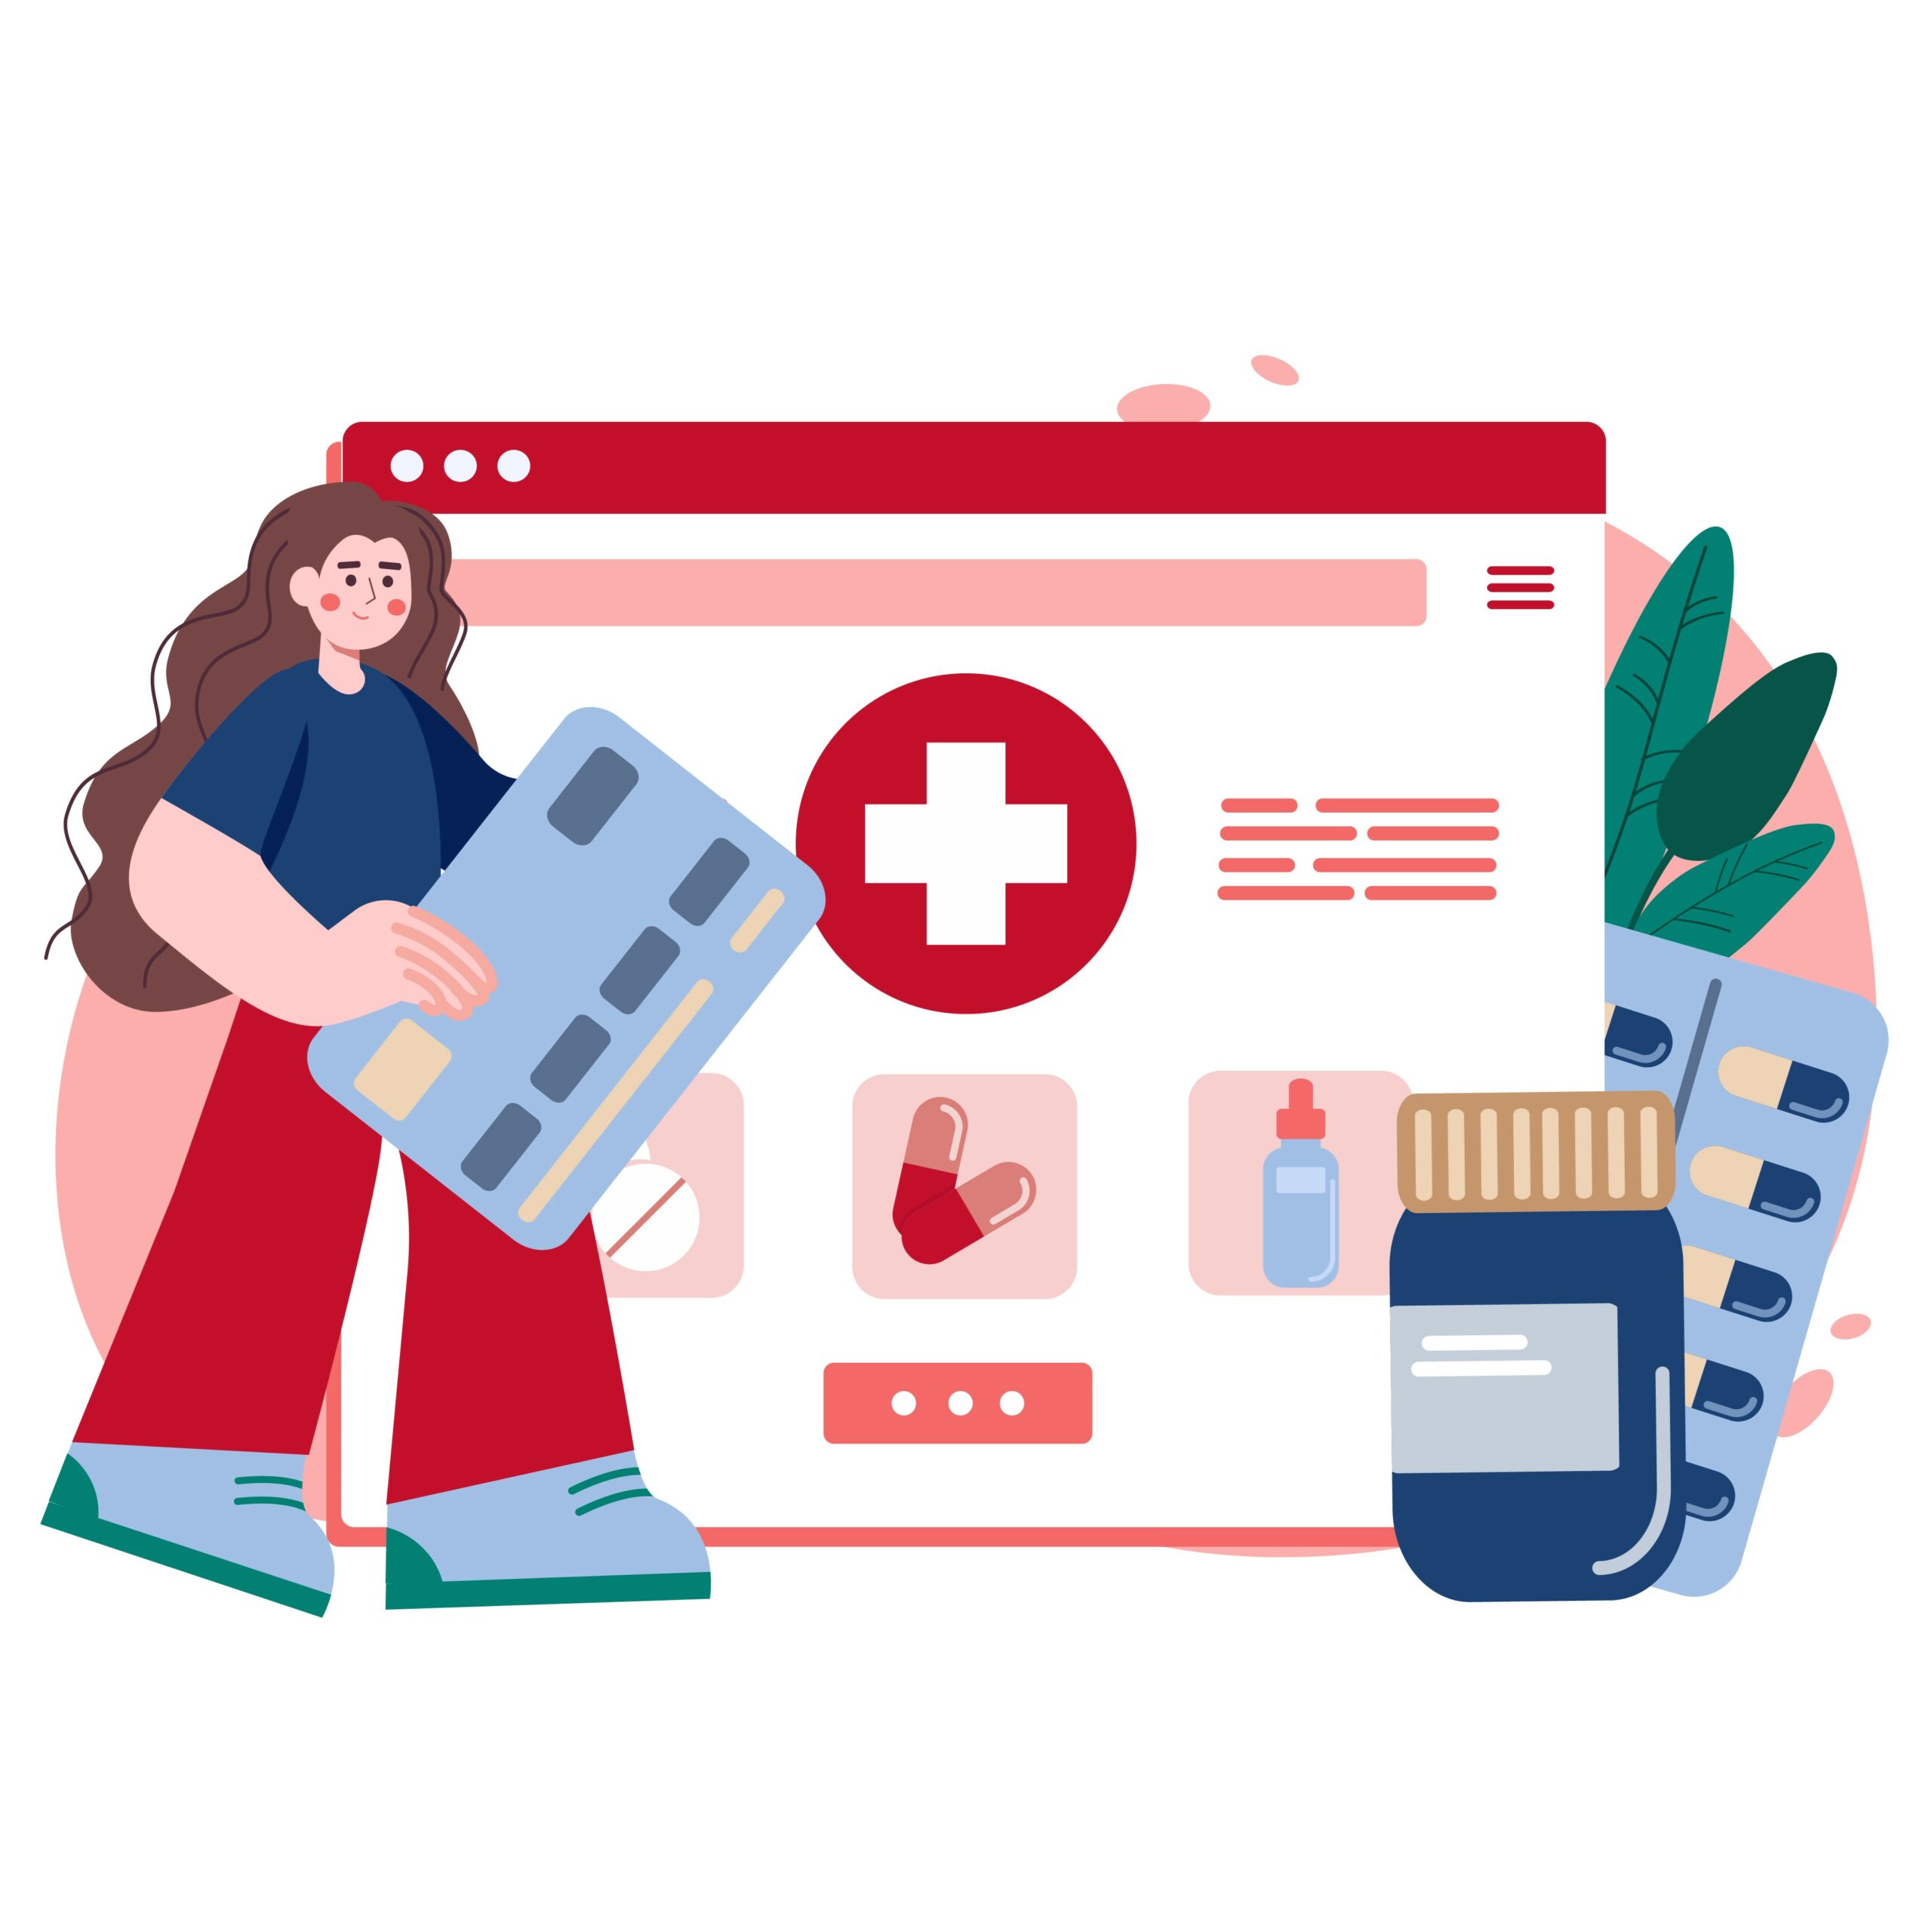 Online pharmacy red concept with people scene in the flat cartoon style. Girl wants to buy some pills on the online pharmacy using online banking. Vector illustration.